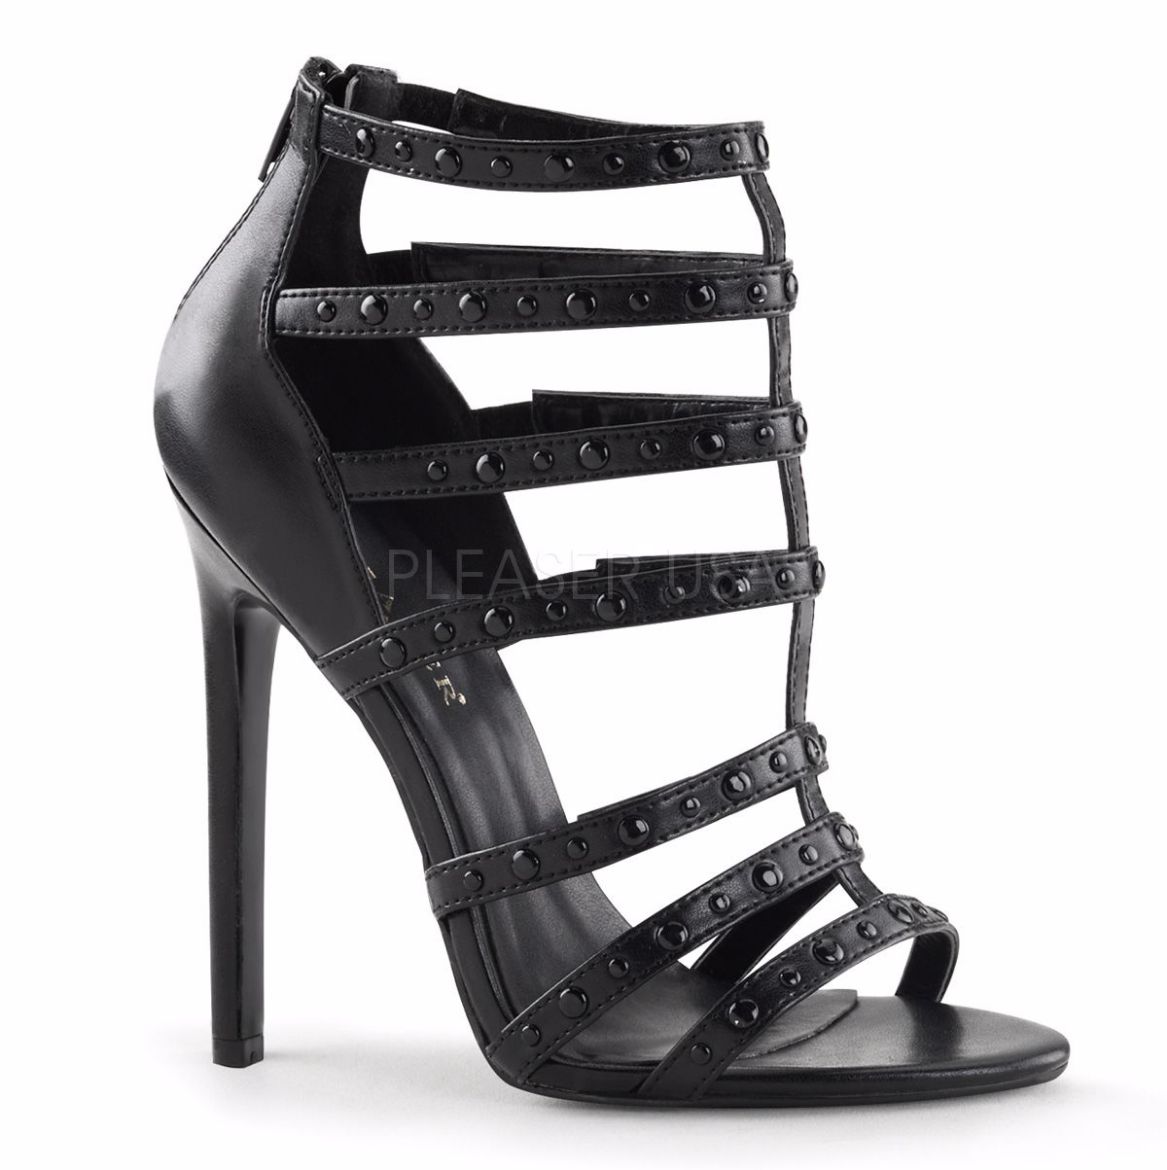 Product image of Pleaser Sexy-15 Black Faux Leather, 5 inch (12.7 cm) Heel Sandal Shoes